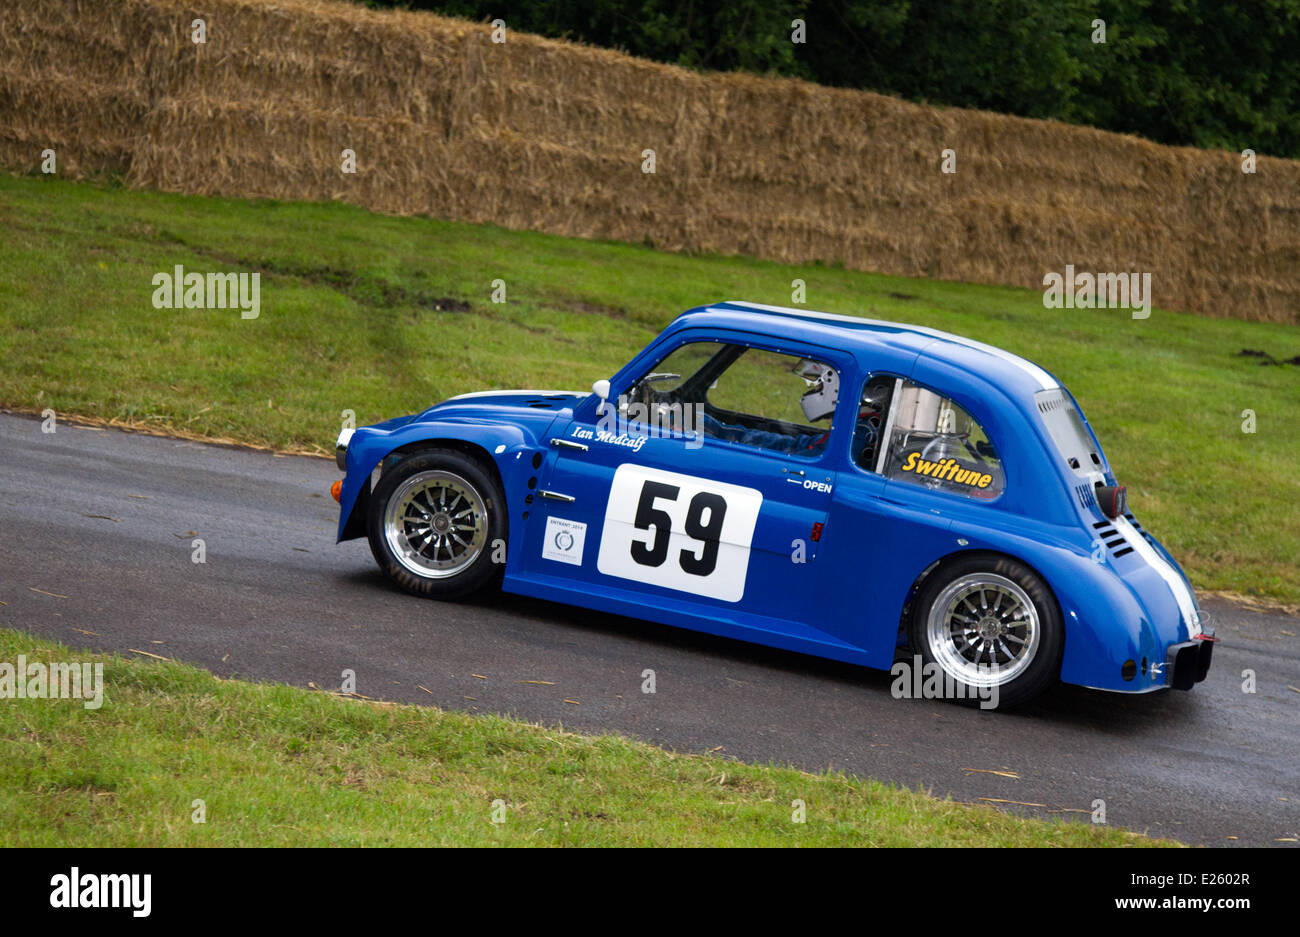 1978 70s seventies Blue White Fiat 500 Special saloon with mini 1380cc engine & bespoke tubular chassis. Touring car driven by Ian Metcalf at the Cholmondeley Pageant of Power. The action is at the 1.2-mile track within the park grounds of Cholmondeley Castle where over 120  isolated cars compete, spanning seven decades of motorsports. Stock Photo